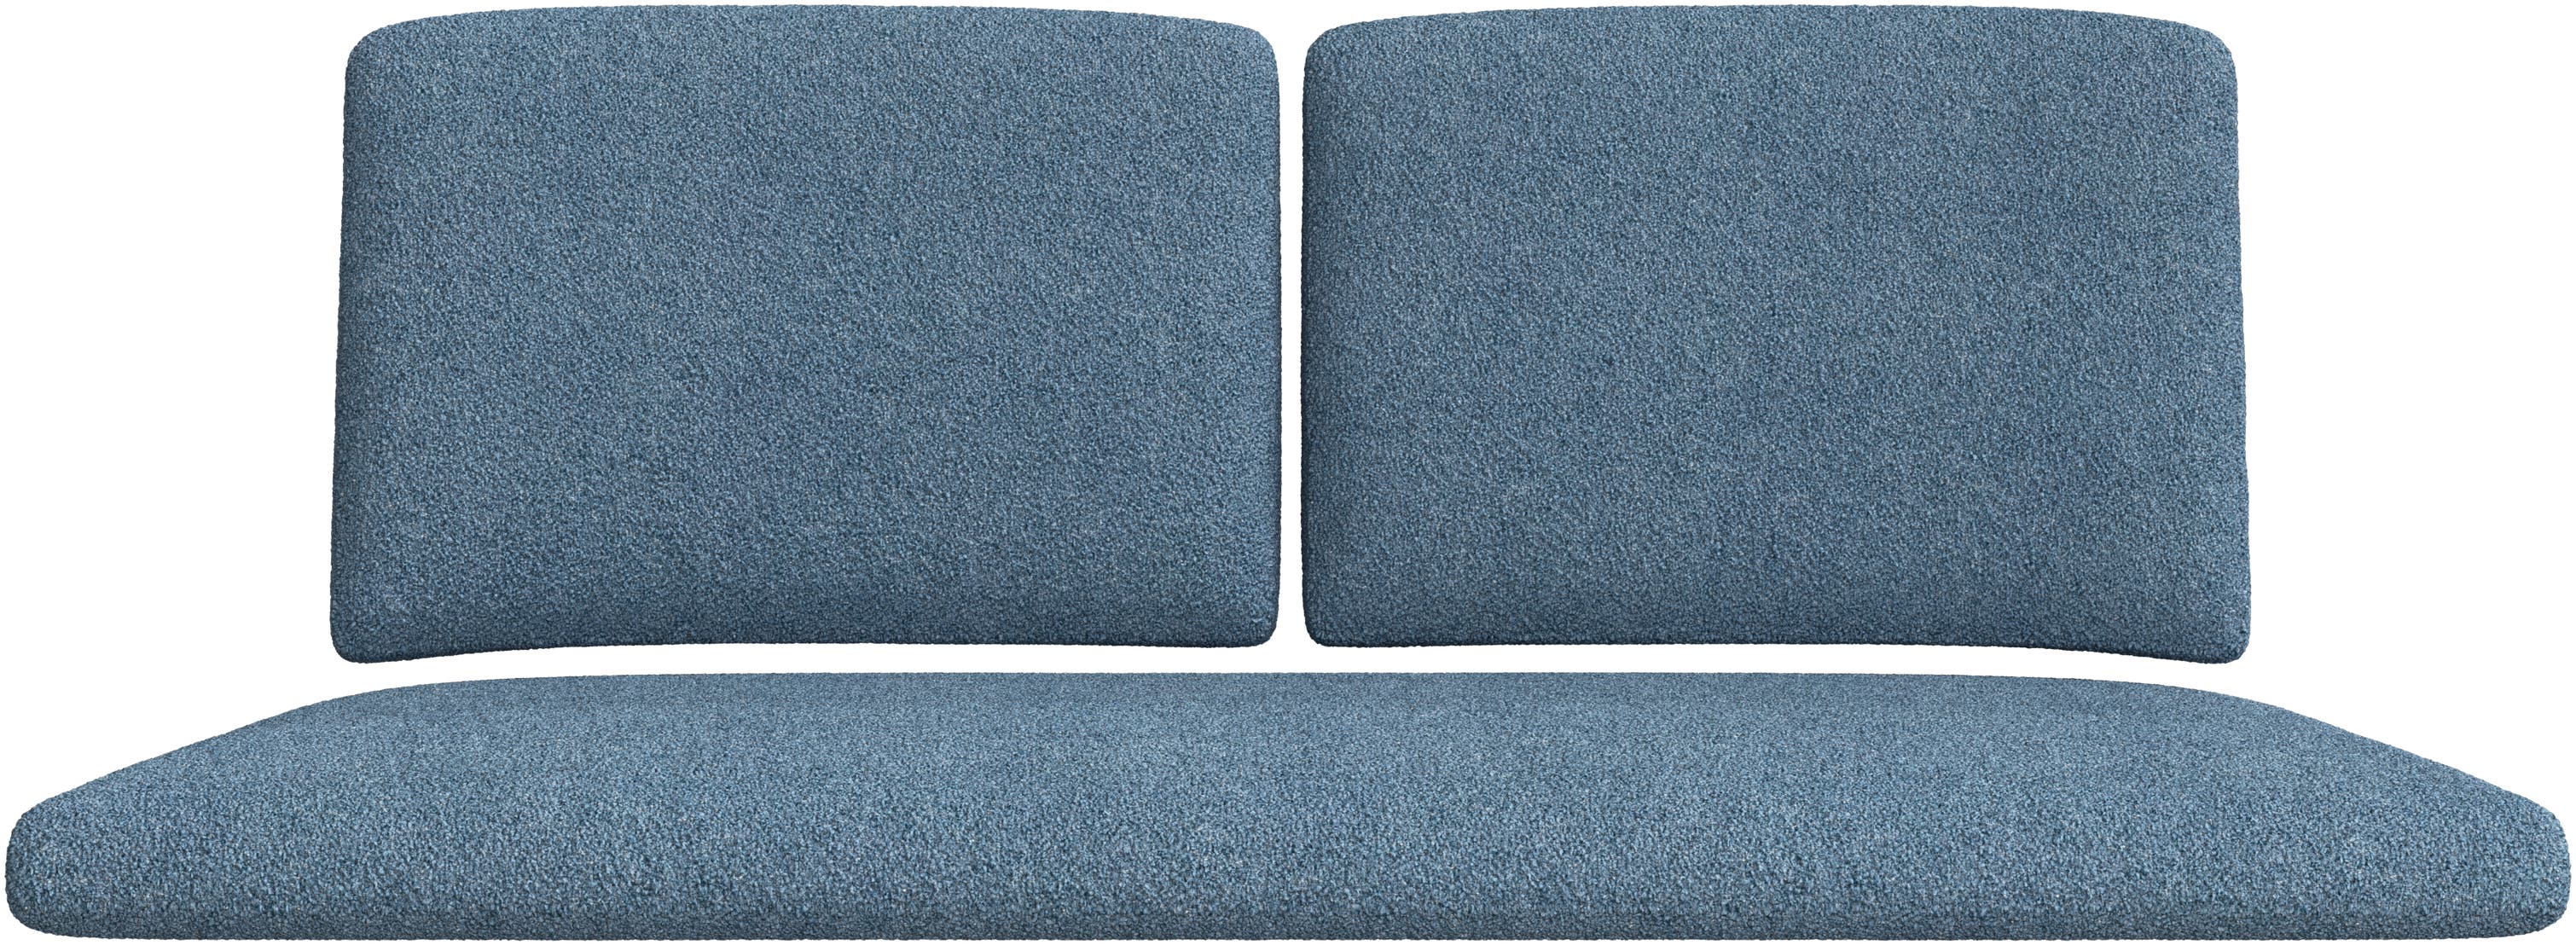 Cancún Seat and back cushion for lounge sofa